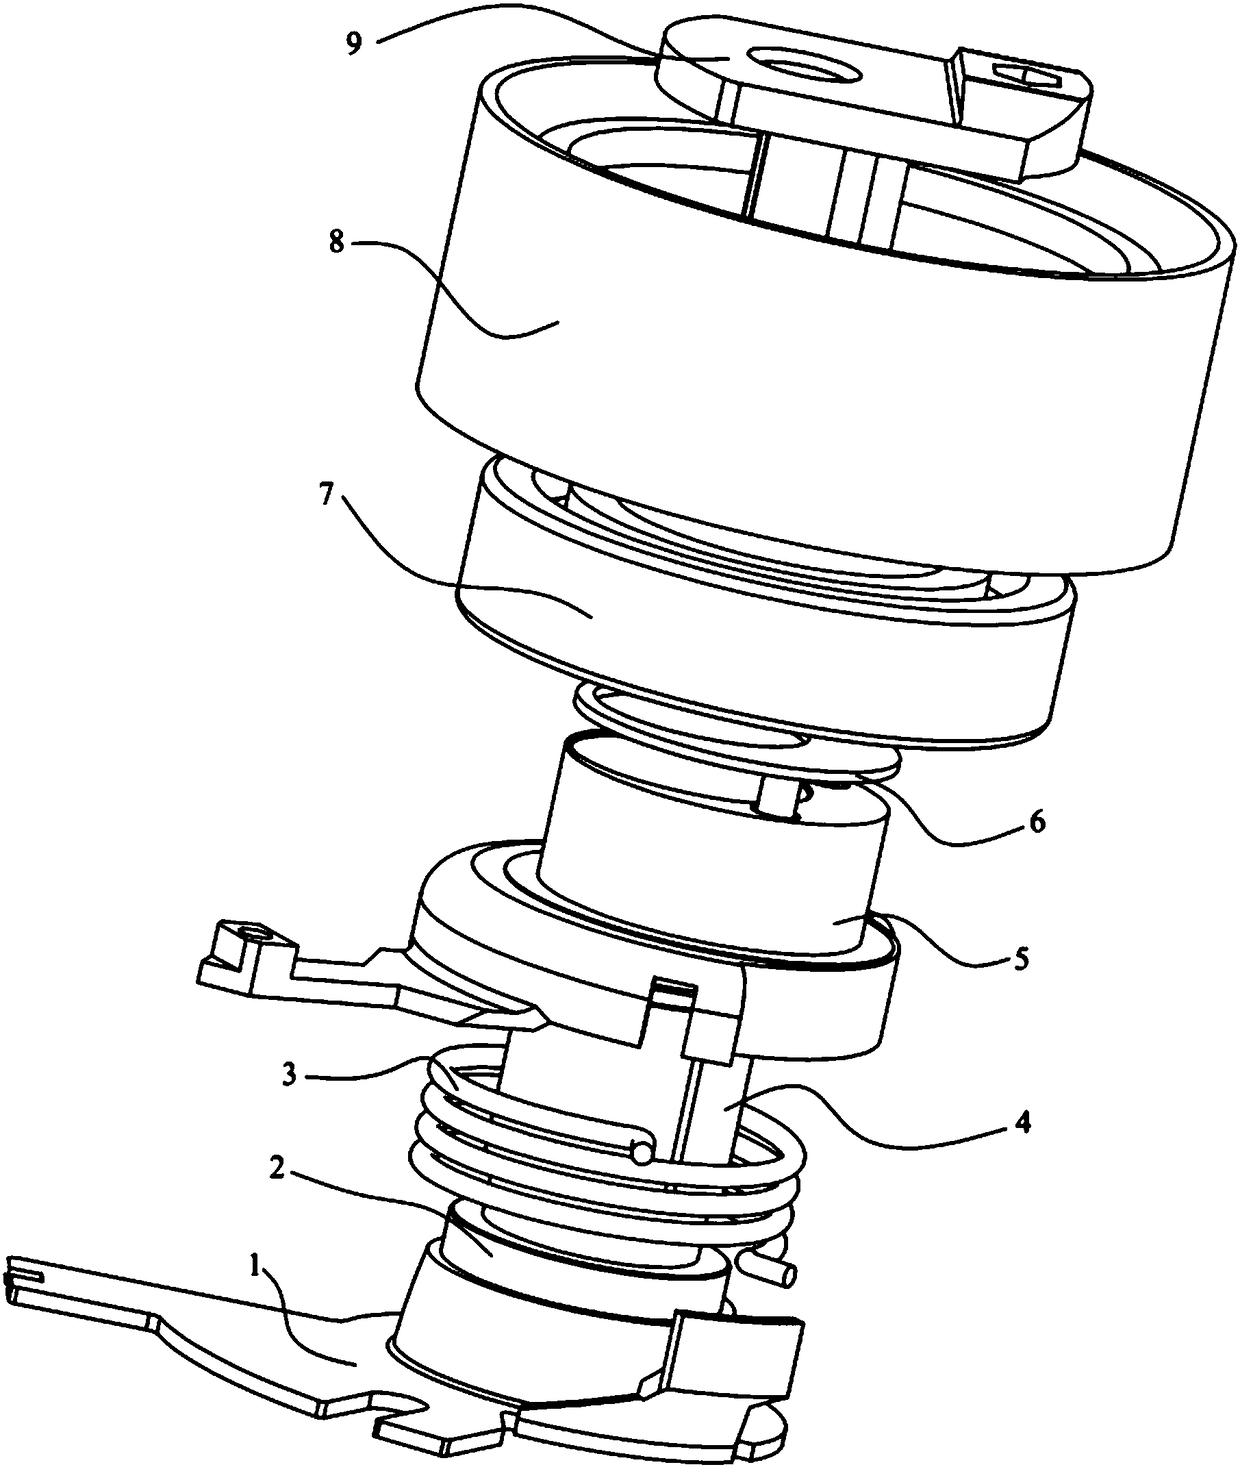 Variable-stiffness double-arm automatic tensioner